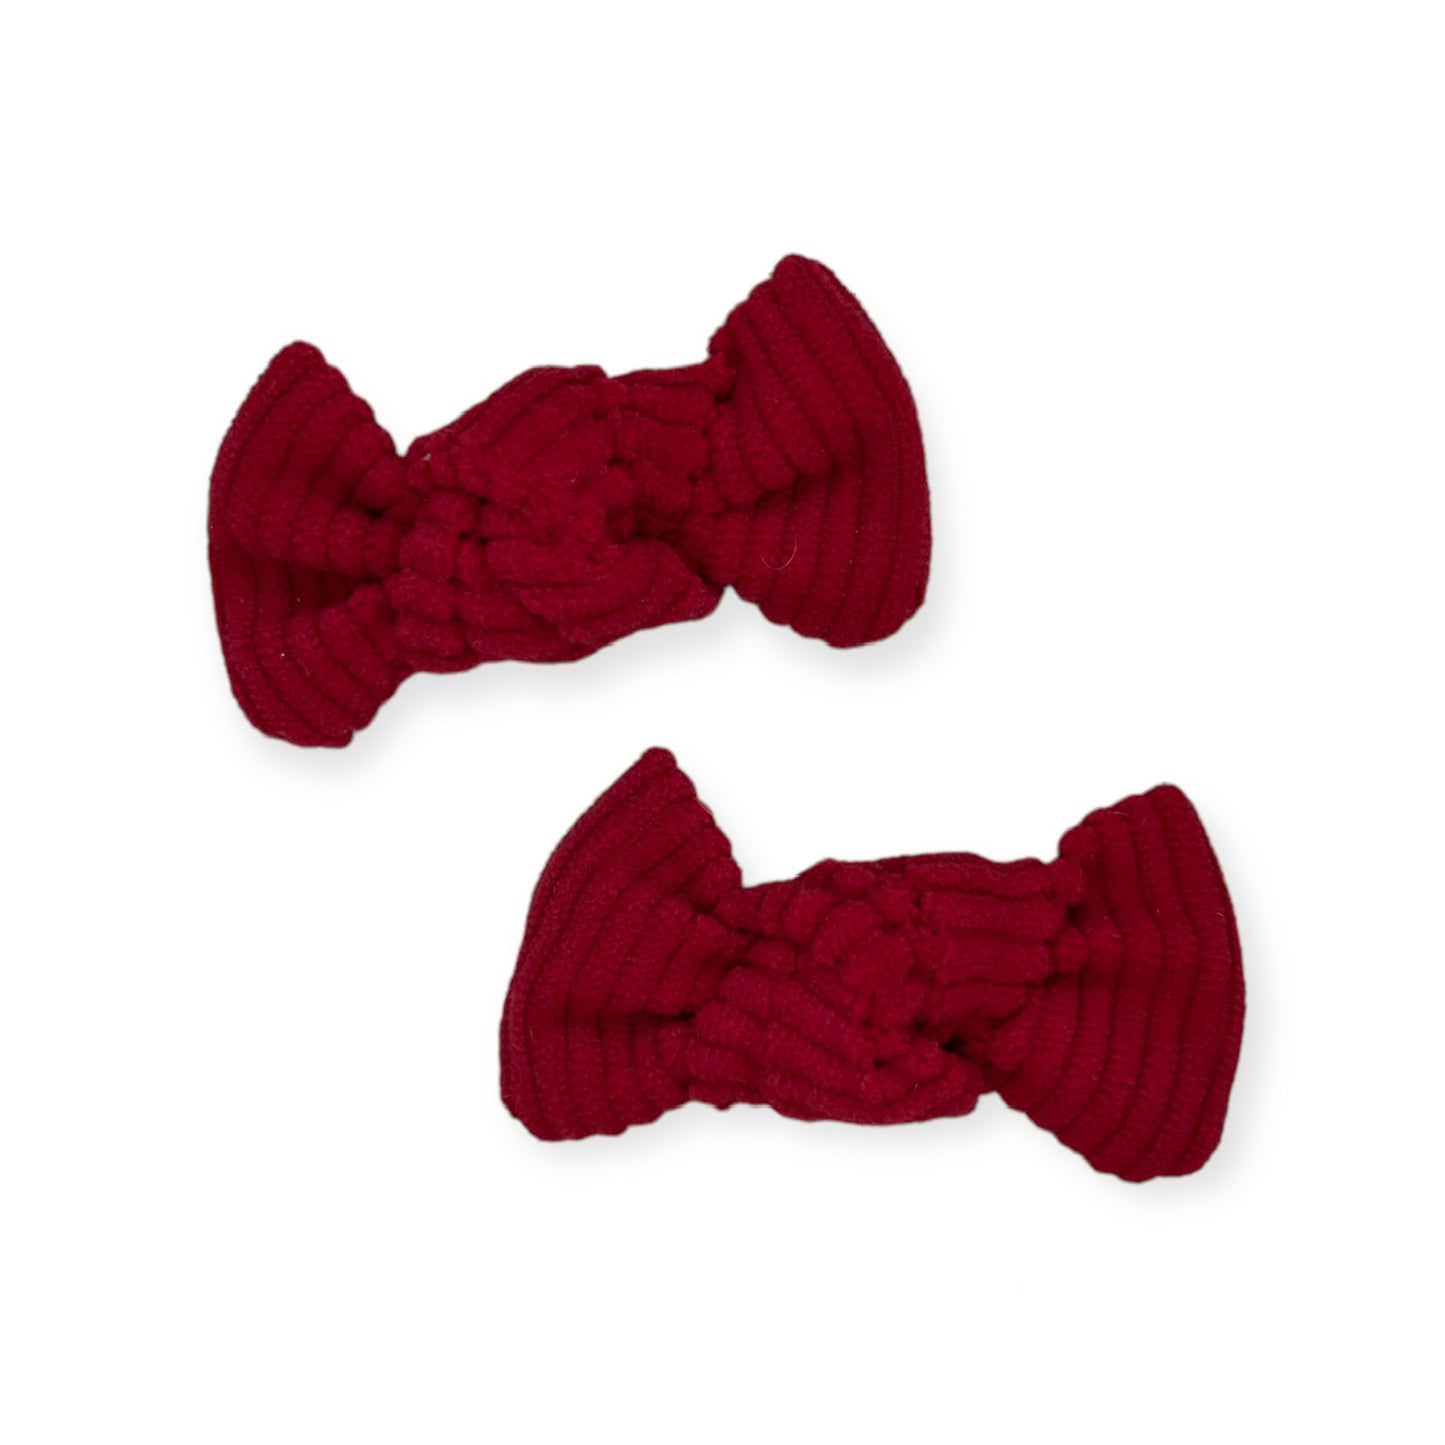 Knotted Pigtail Bows - Red Corduroy